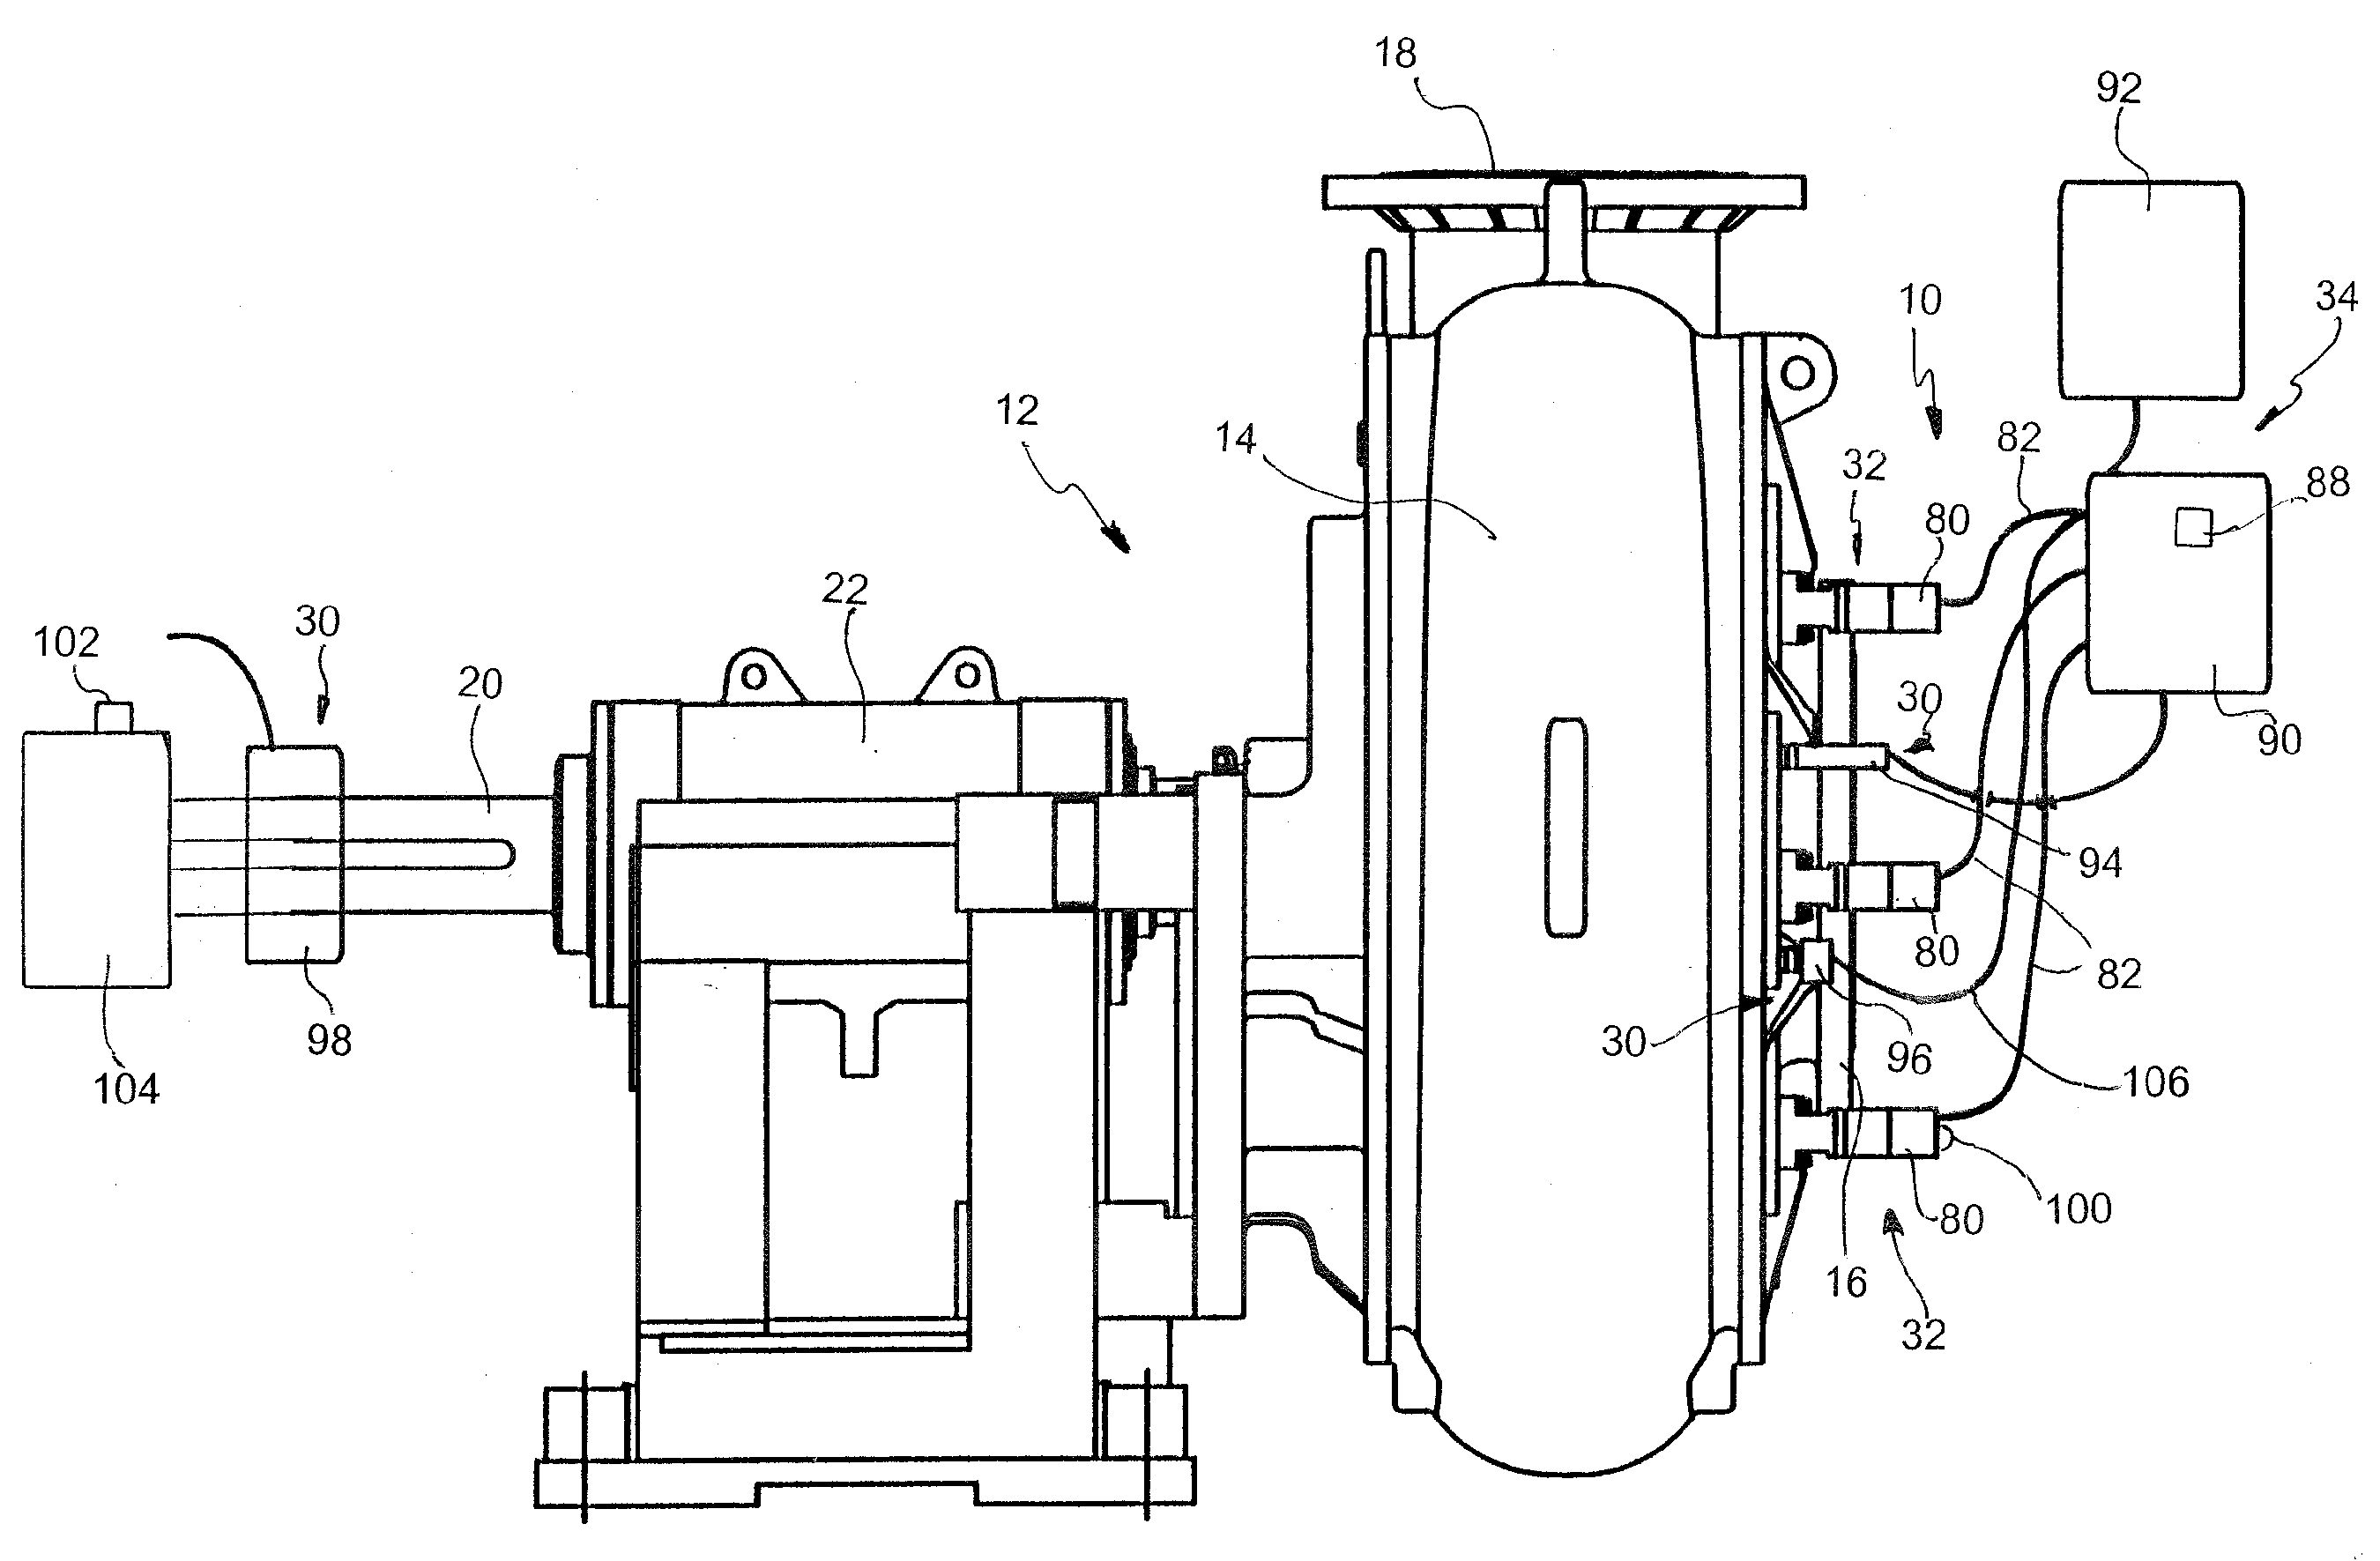 Self-monitoring system for evaluating and controlling adjustment requirements of leakage restricting devices in rotodynamic pumps